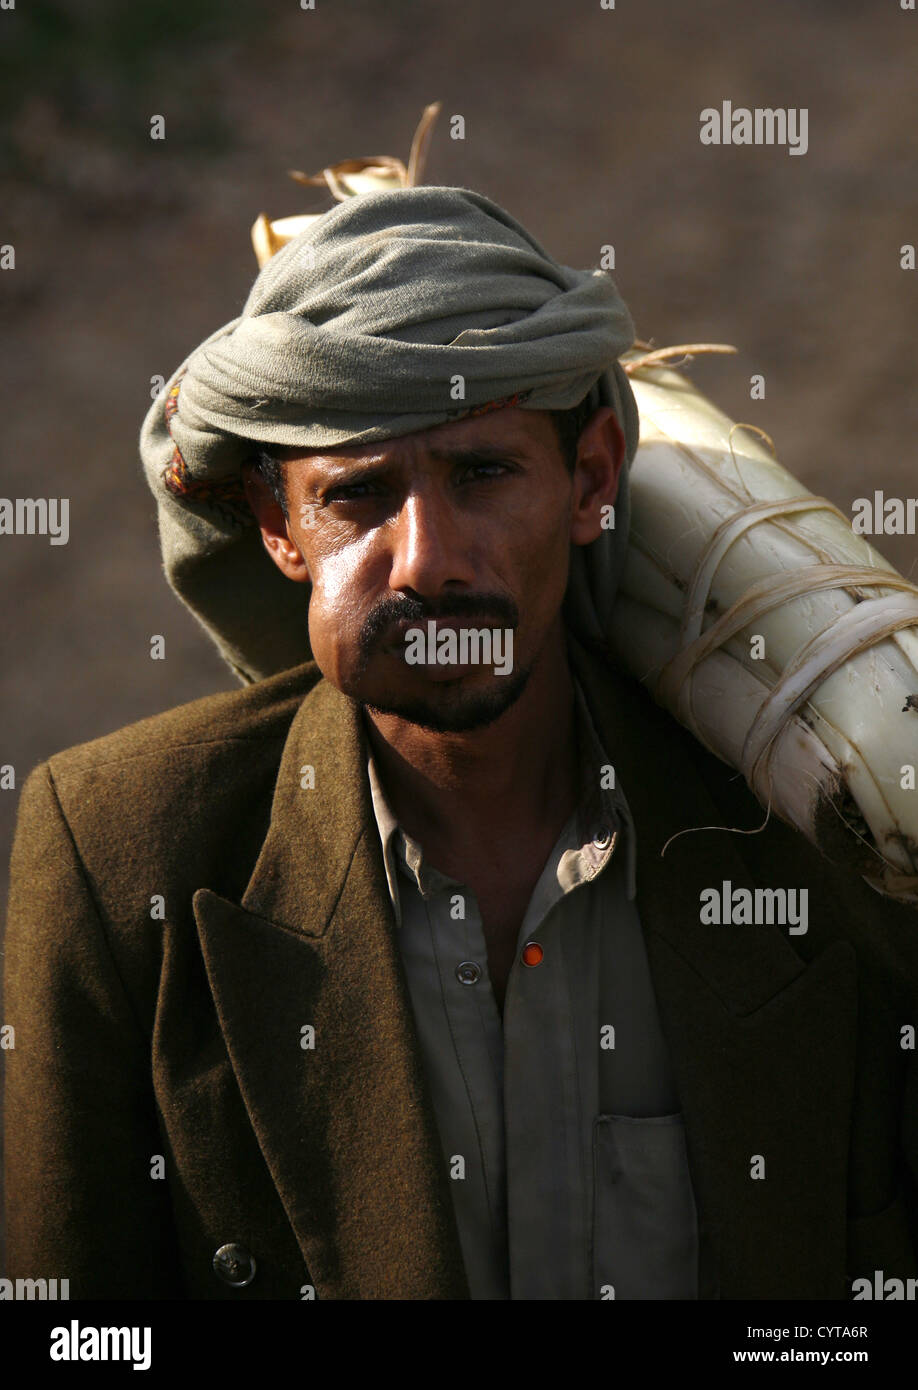 Khat Chewer Carring A Package On His Shoulder Under The Sun Light, Shahara, Yemen Stock Photo